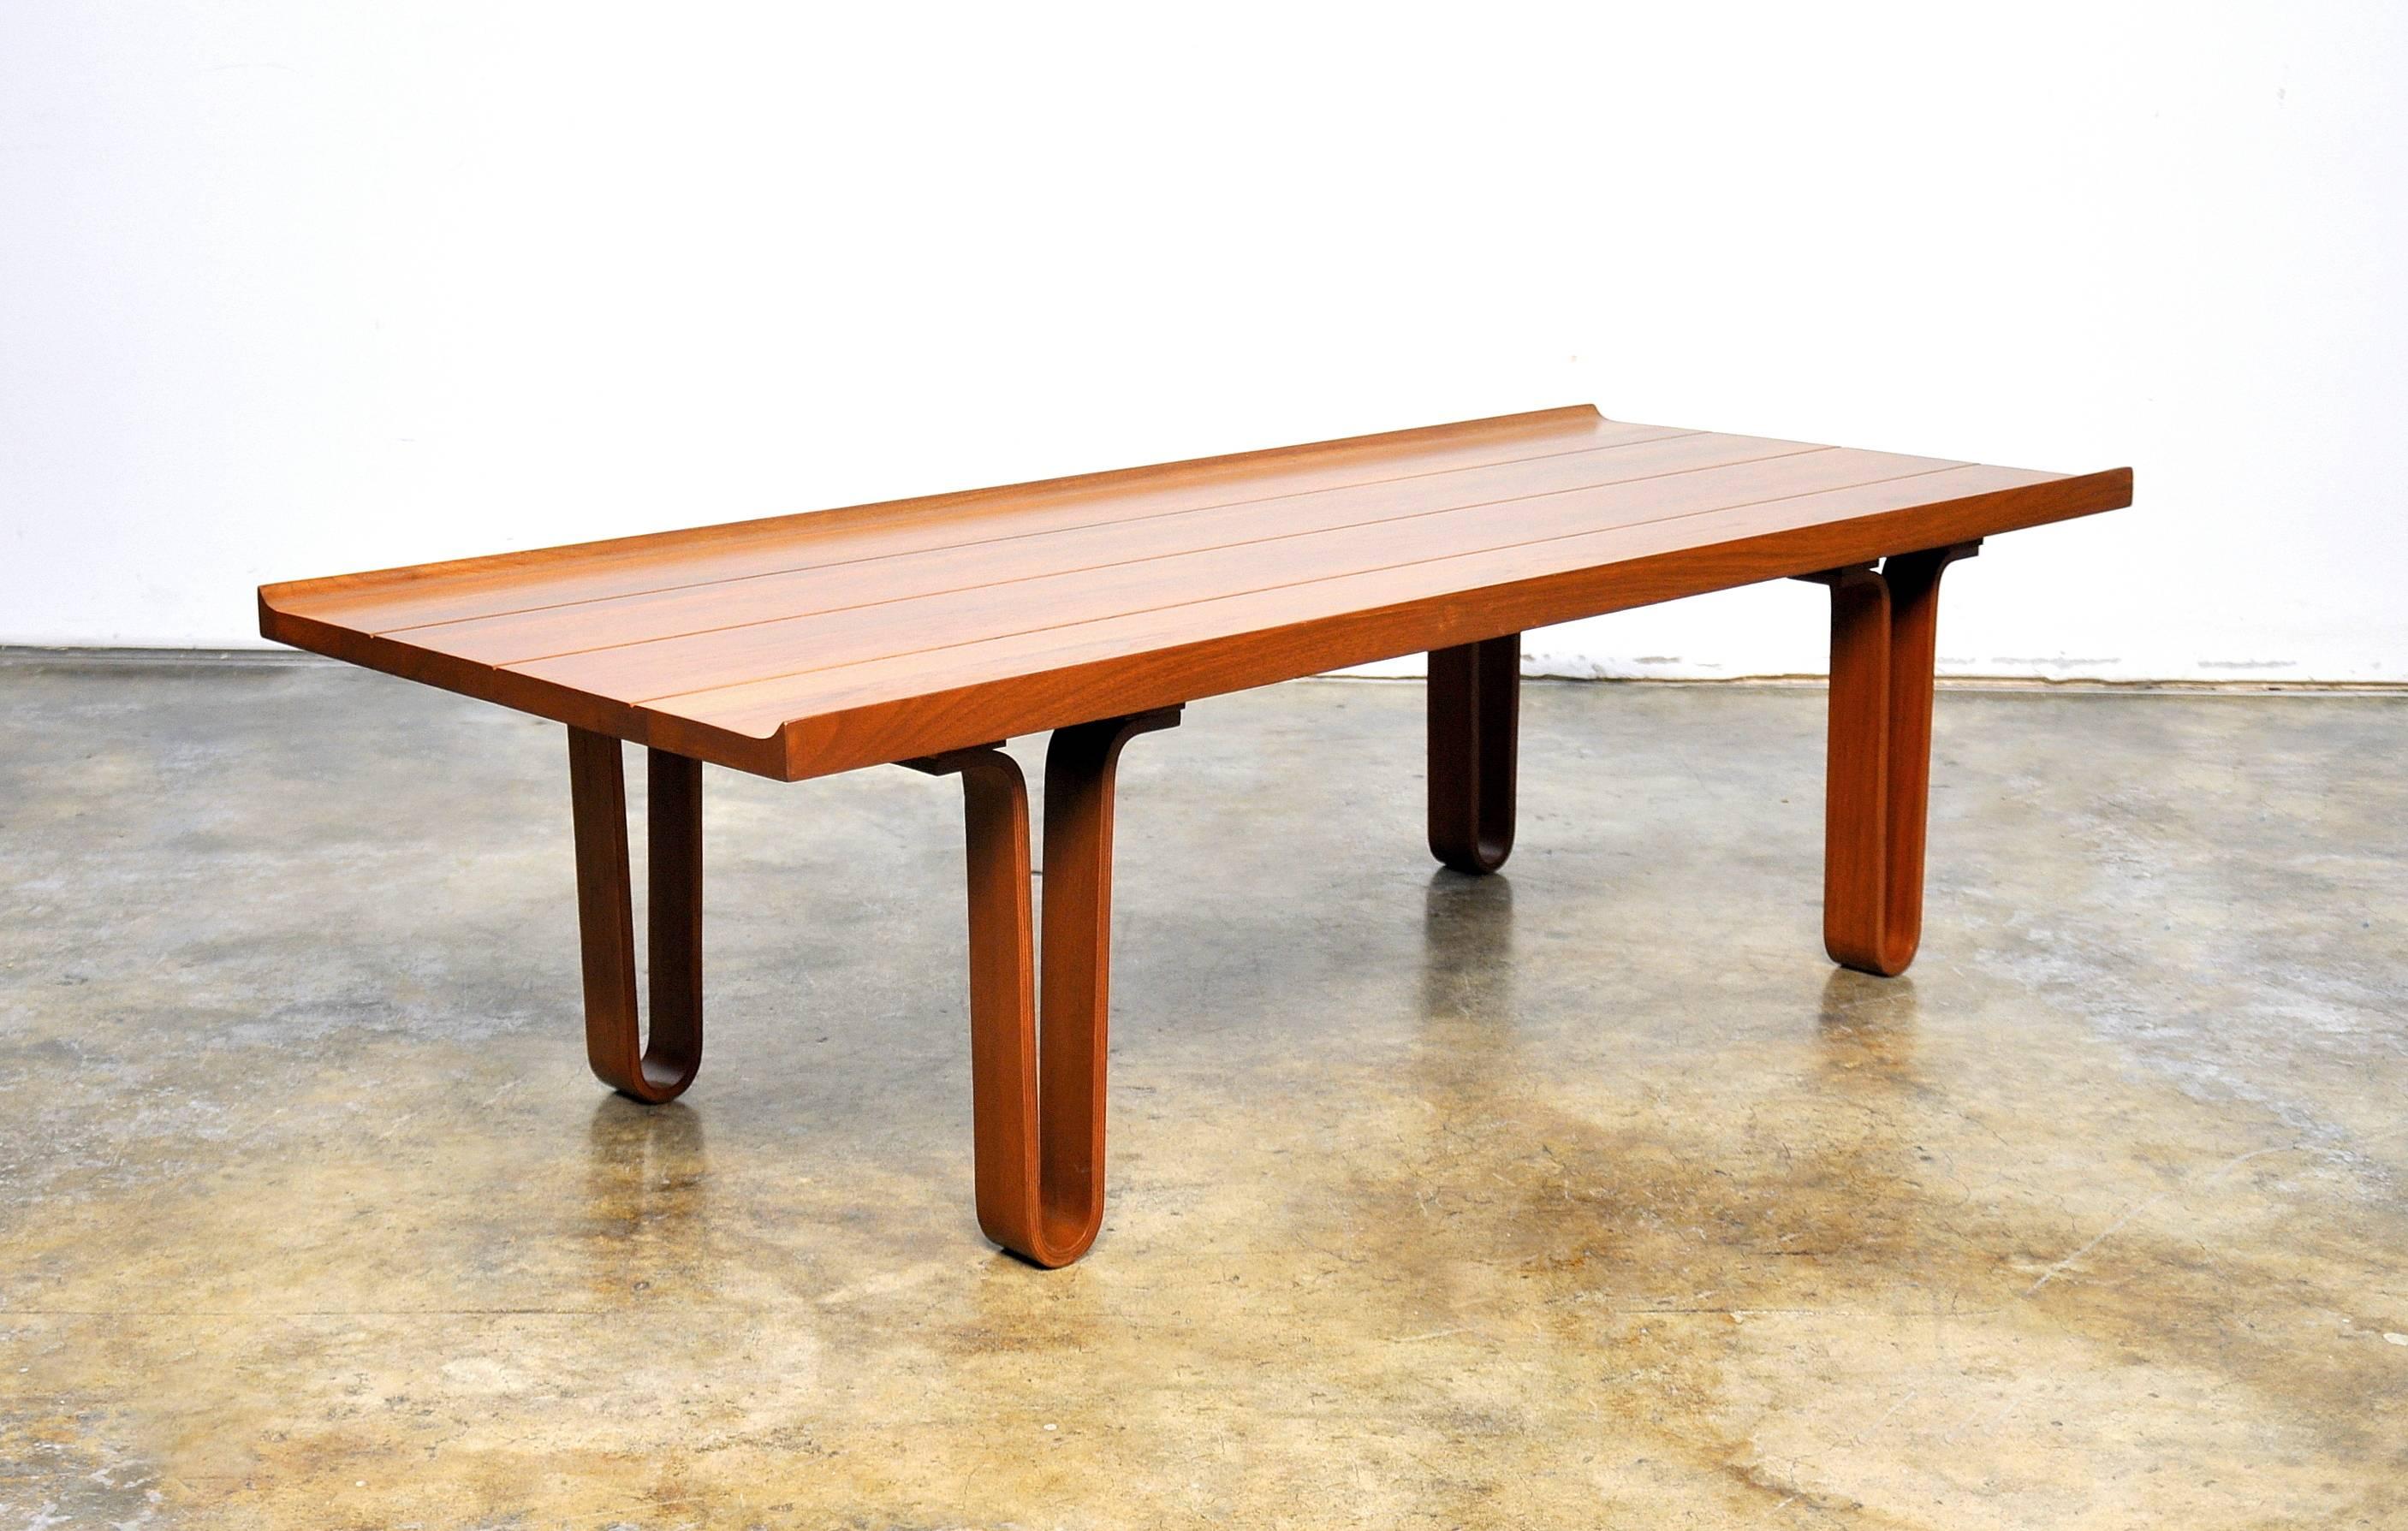 Mid-Century Modern bentwood, walnut, cocktail table bench with masterfully crafted attention to detail. The seamless joinery of solid walnut creates rich flowing grain patterns on the top. The table is sleekly styled, and its high-end craftsmanship